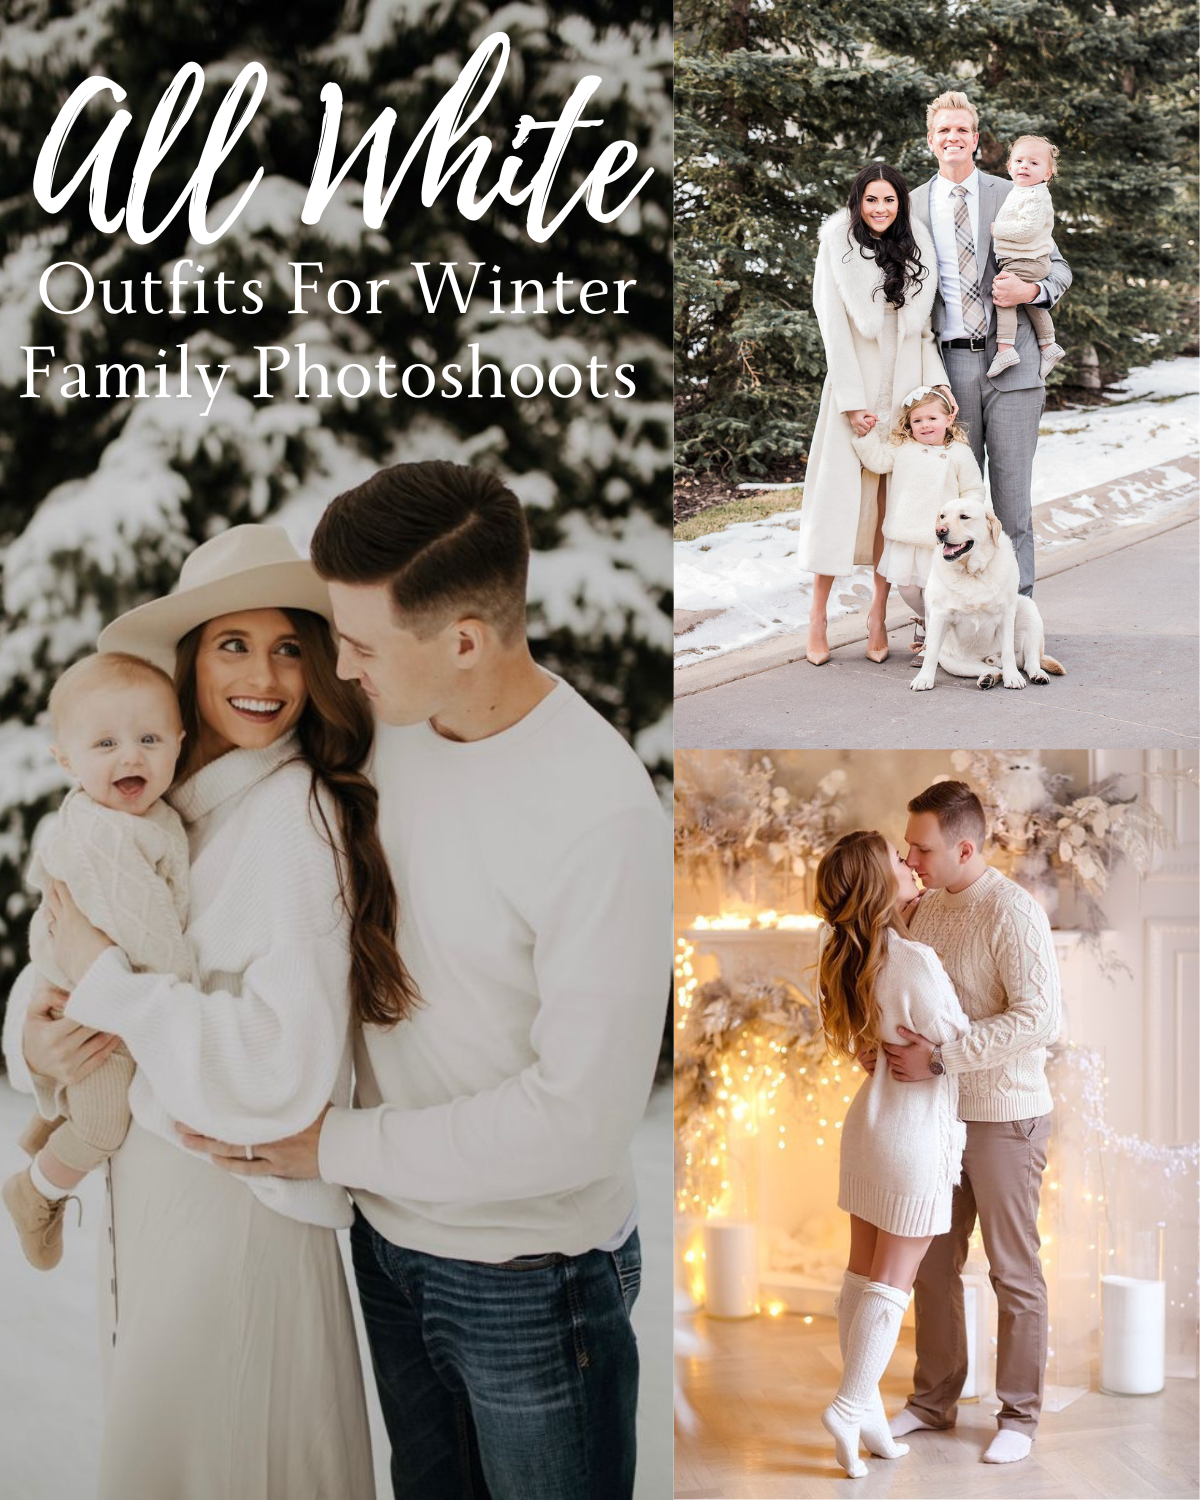 all white family photoshoot outfit ideas winter